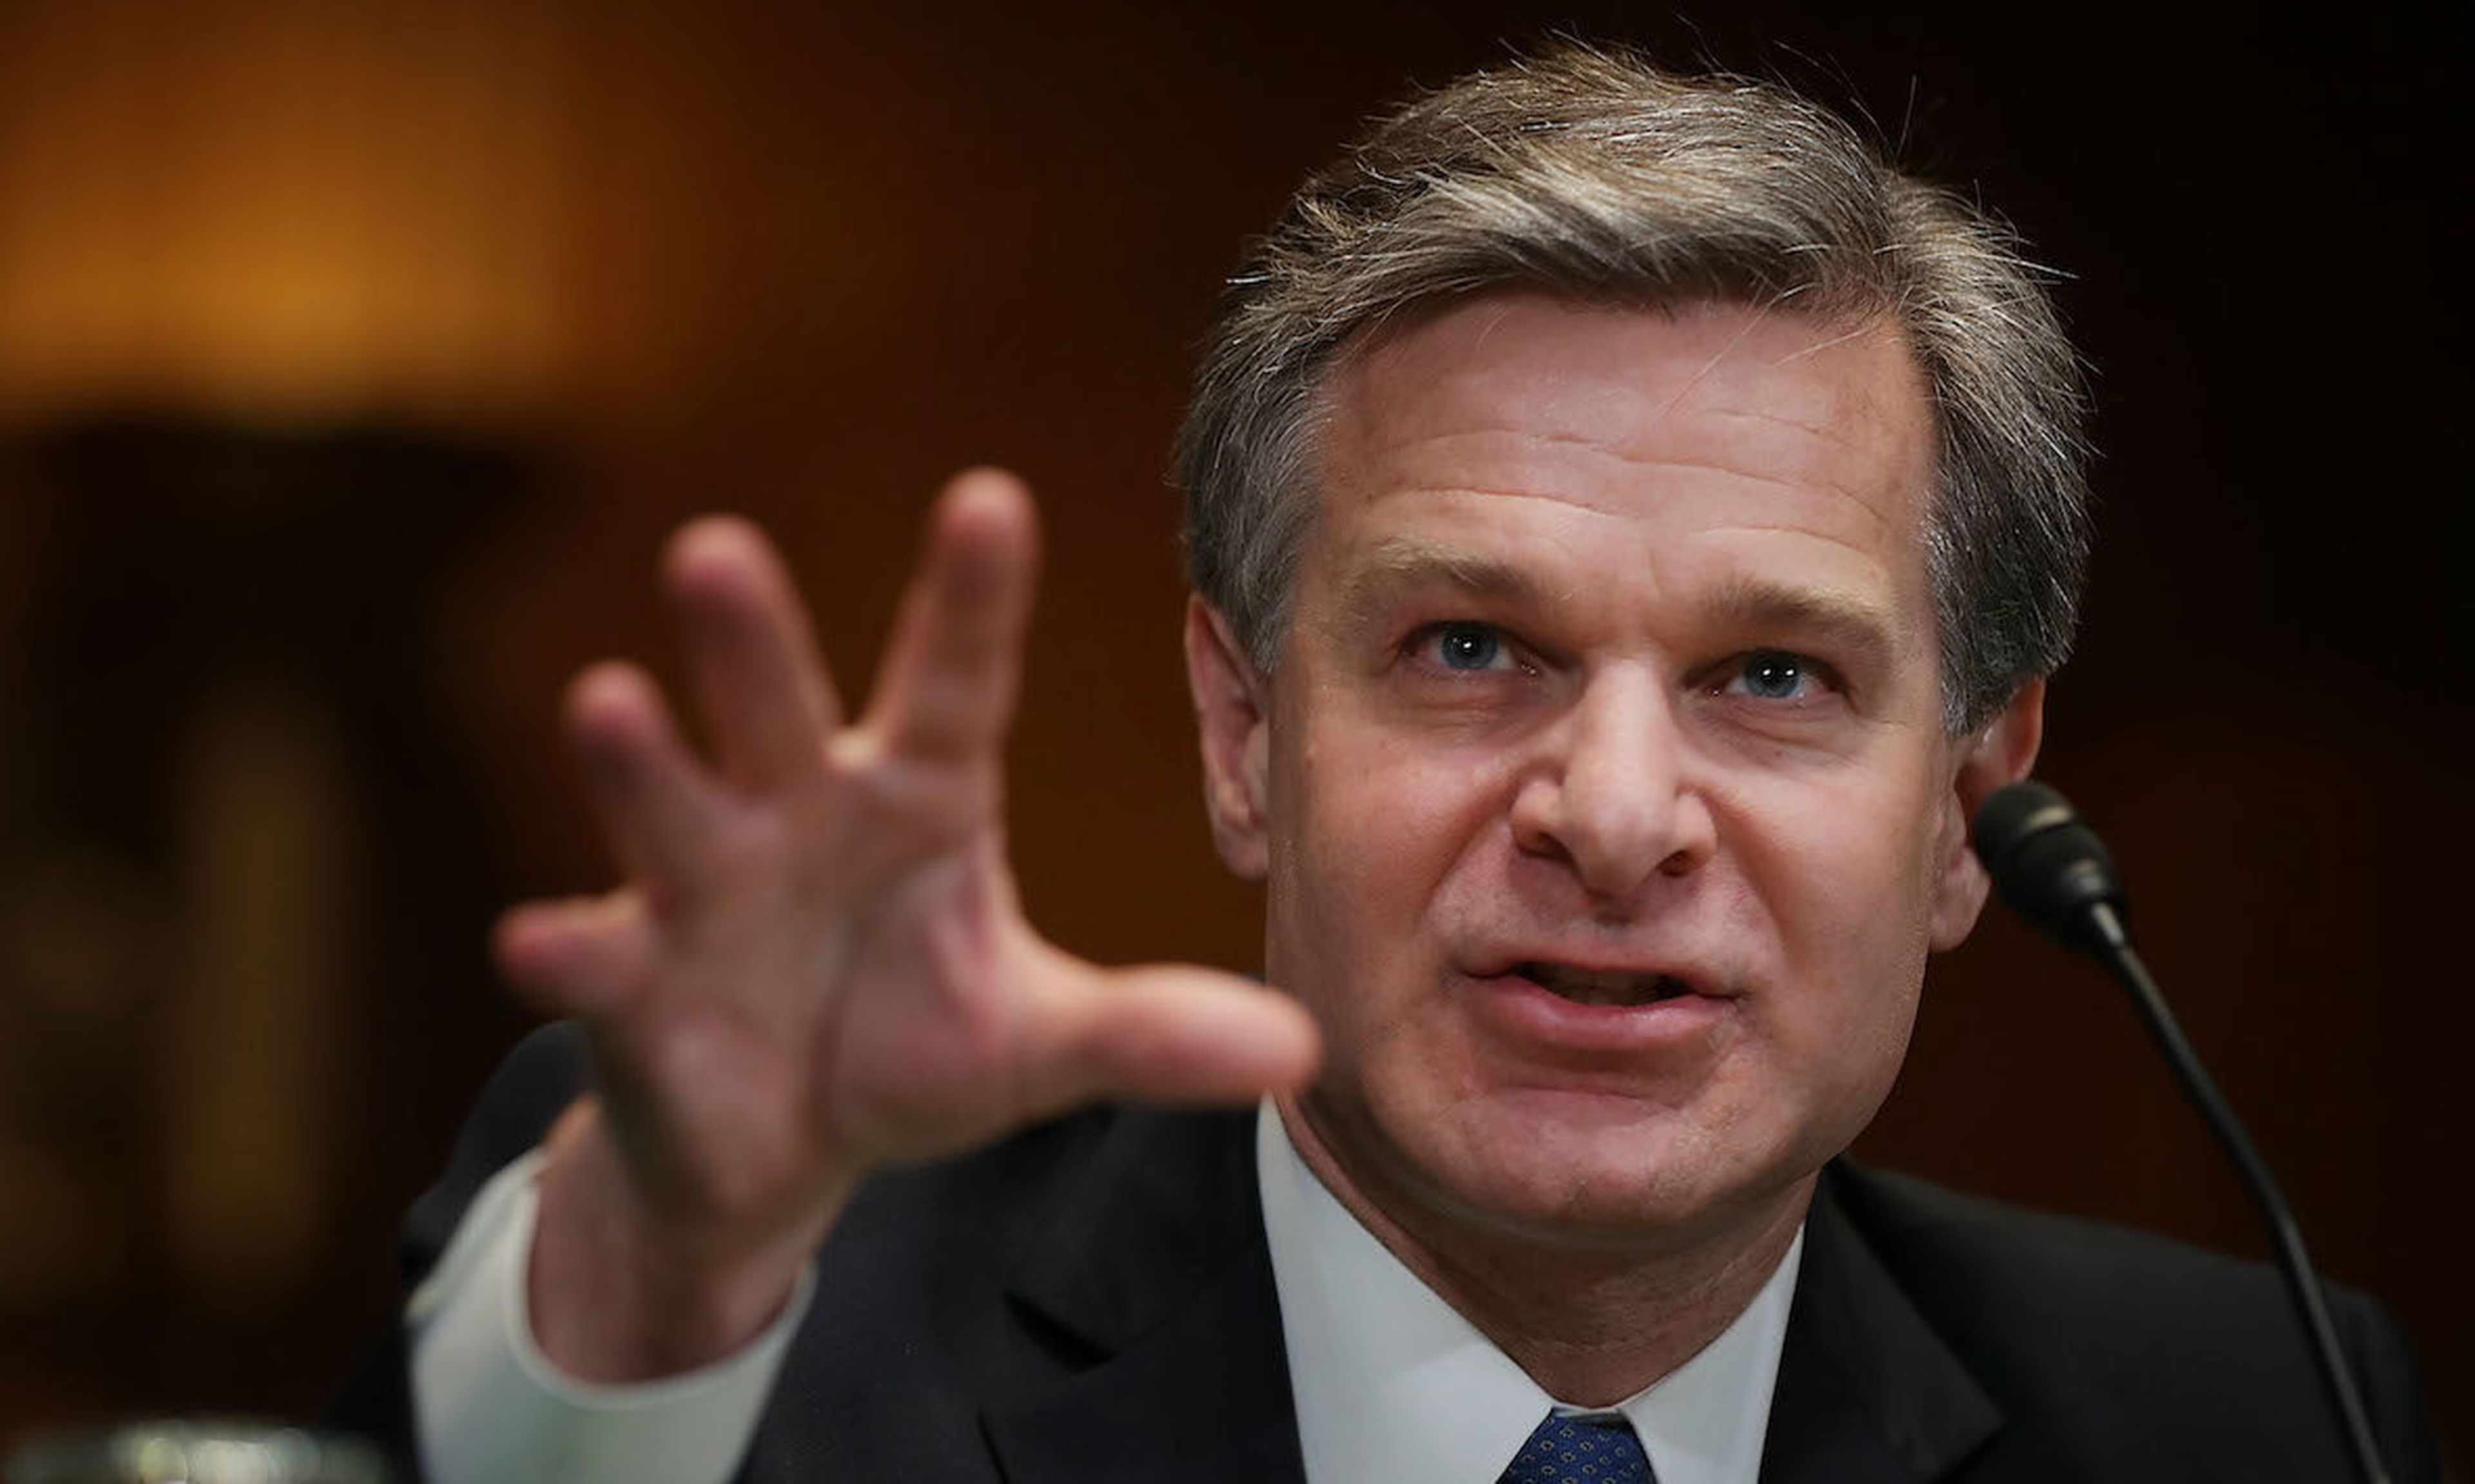 FBI Director Christopher Wray testifies before the Senate in May 2018. Wray endorsed the concept of a cyber incident reporting bill but said the FBI had a number of issues with the way that reporting would be structured. (Photo by Chip Somodevilla/Getty Images)